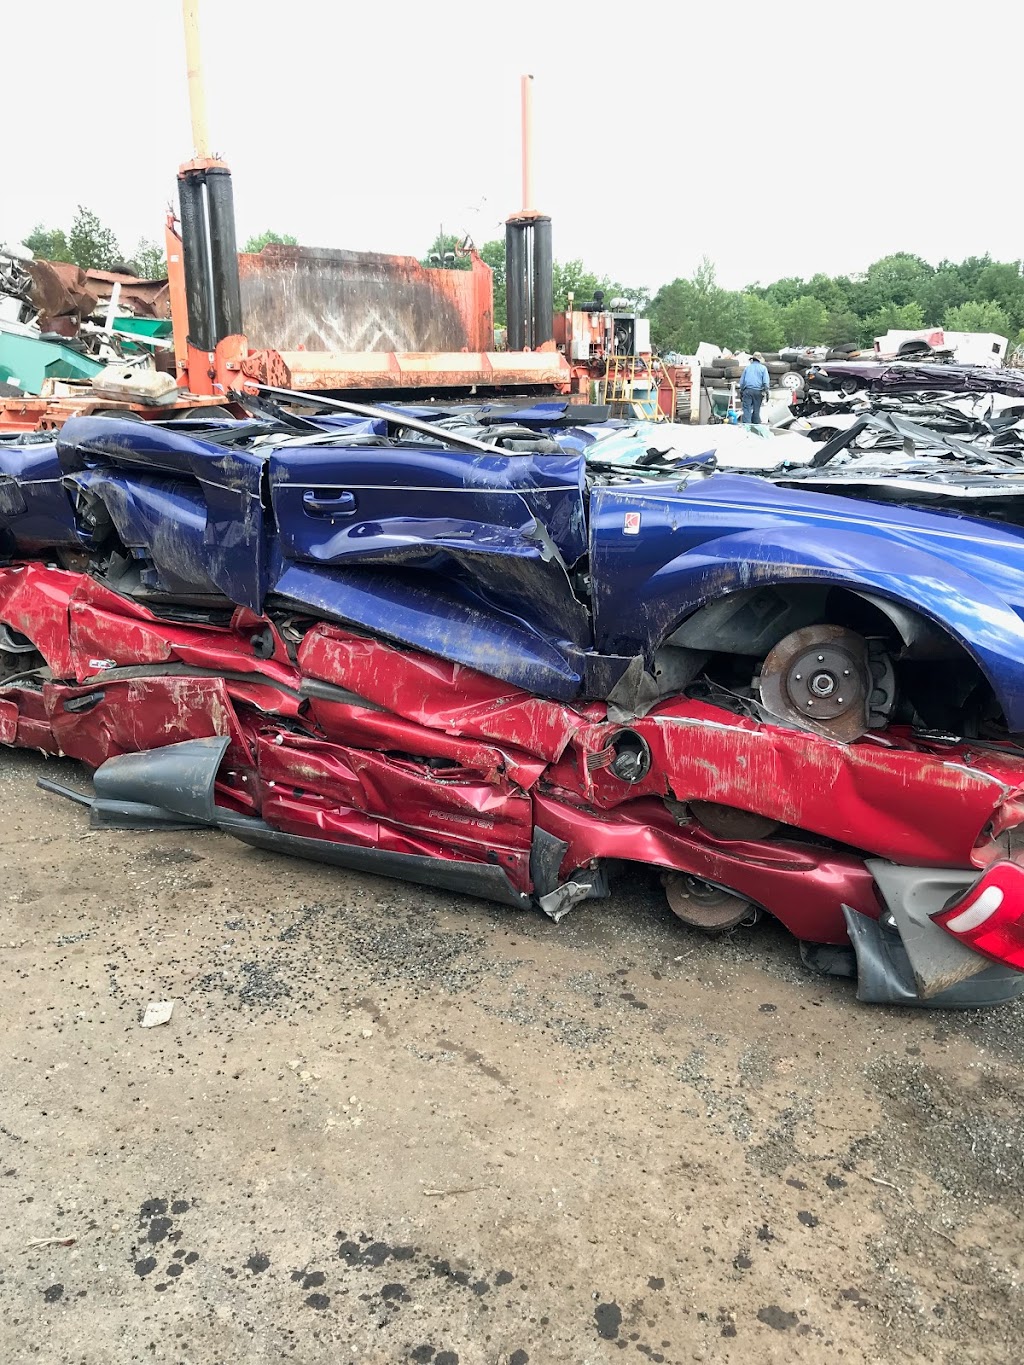 Wilcox Auto Salvage & Metal Recycling | 241 Old Mill Rd, Sellersville, PA 18960 | Phone: (215) 257-1220